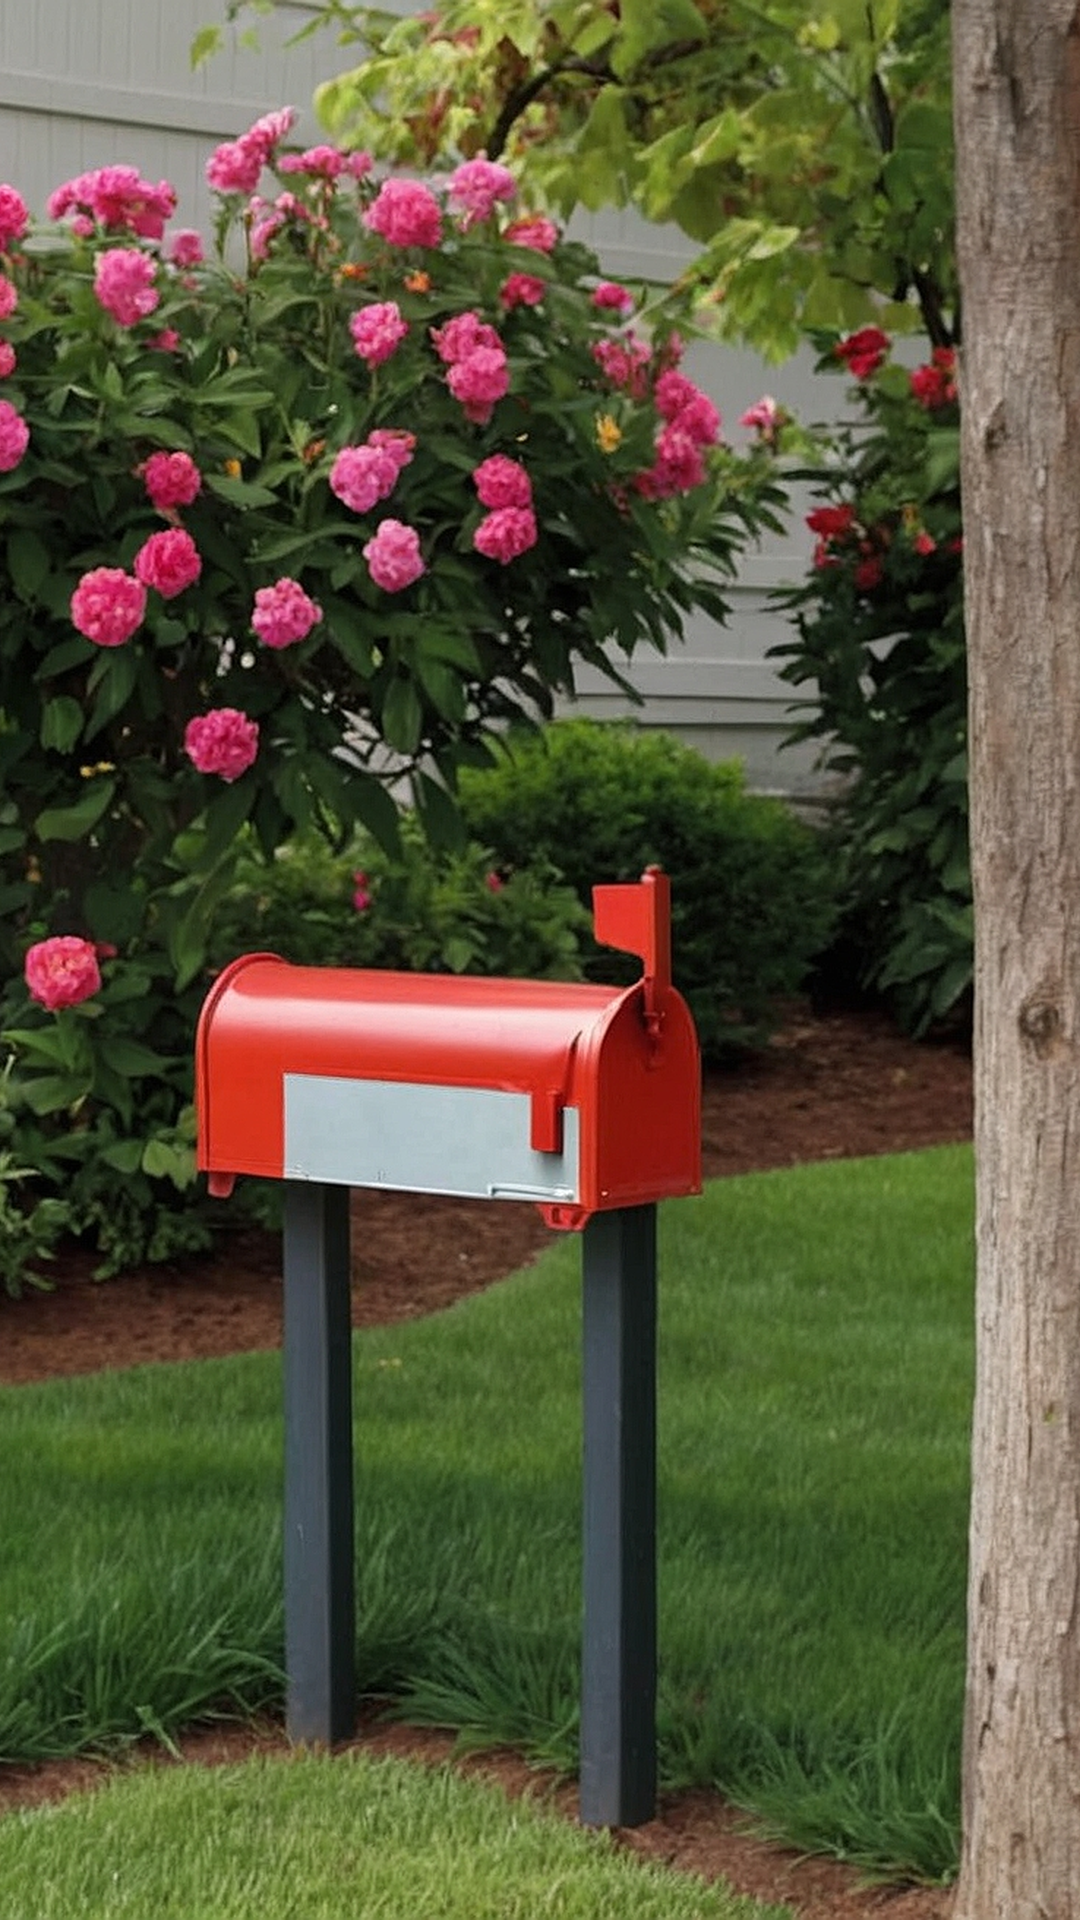 Post Perfect: Creative Mailbox Flower Bed Concepts